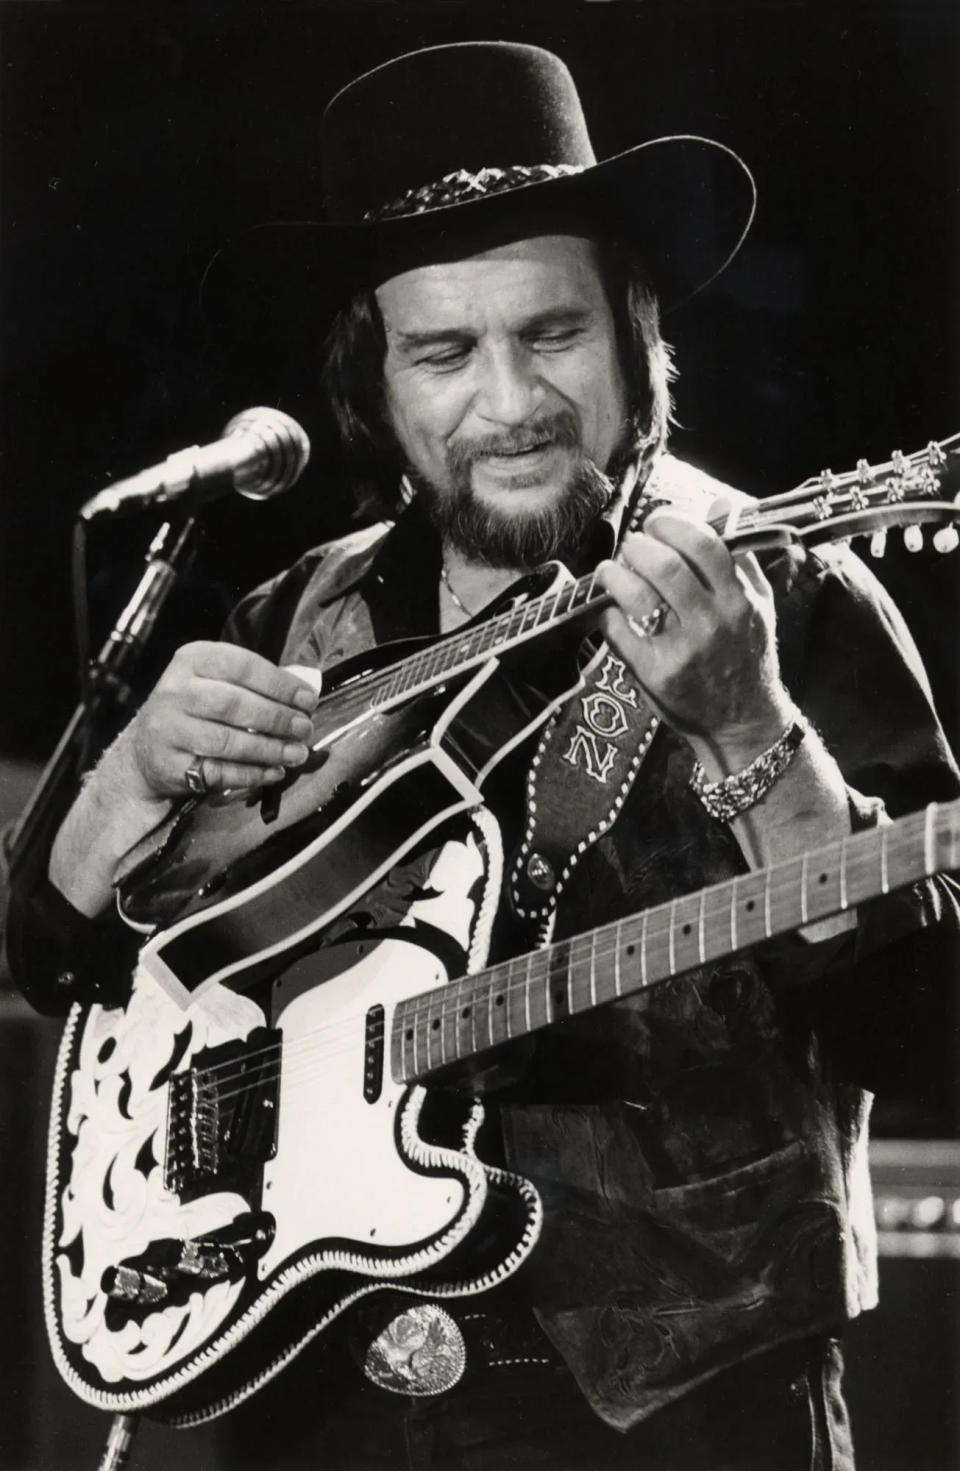 Country music legend Waylon Jennings performs in Nashville, Tennessee in 1984.